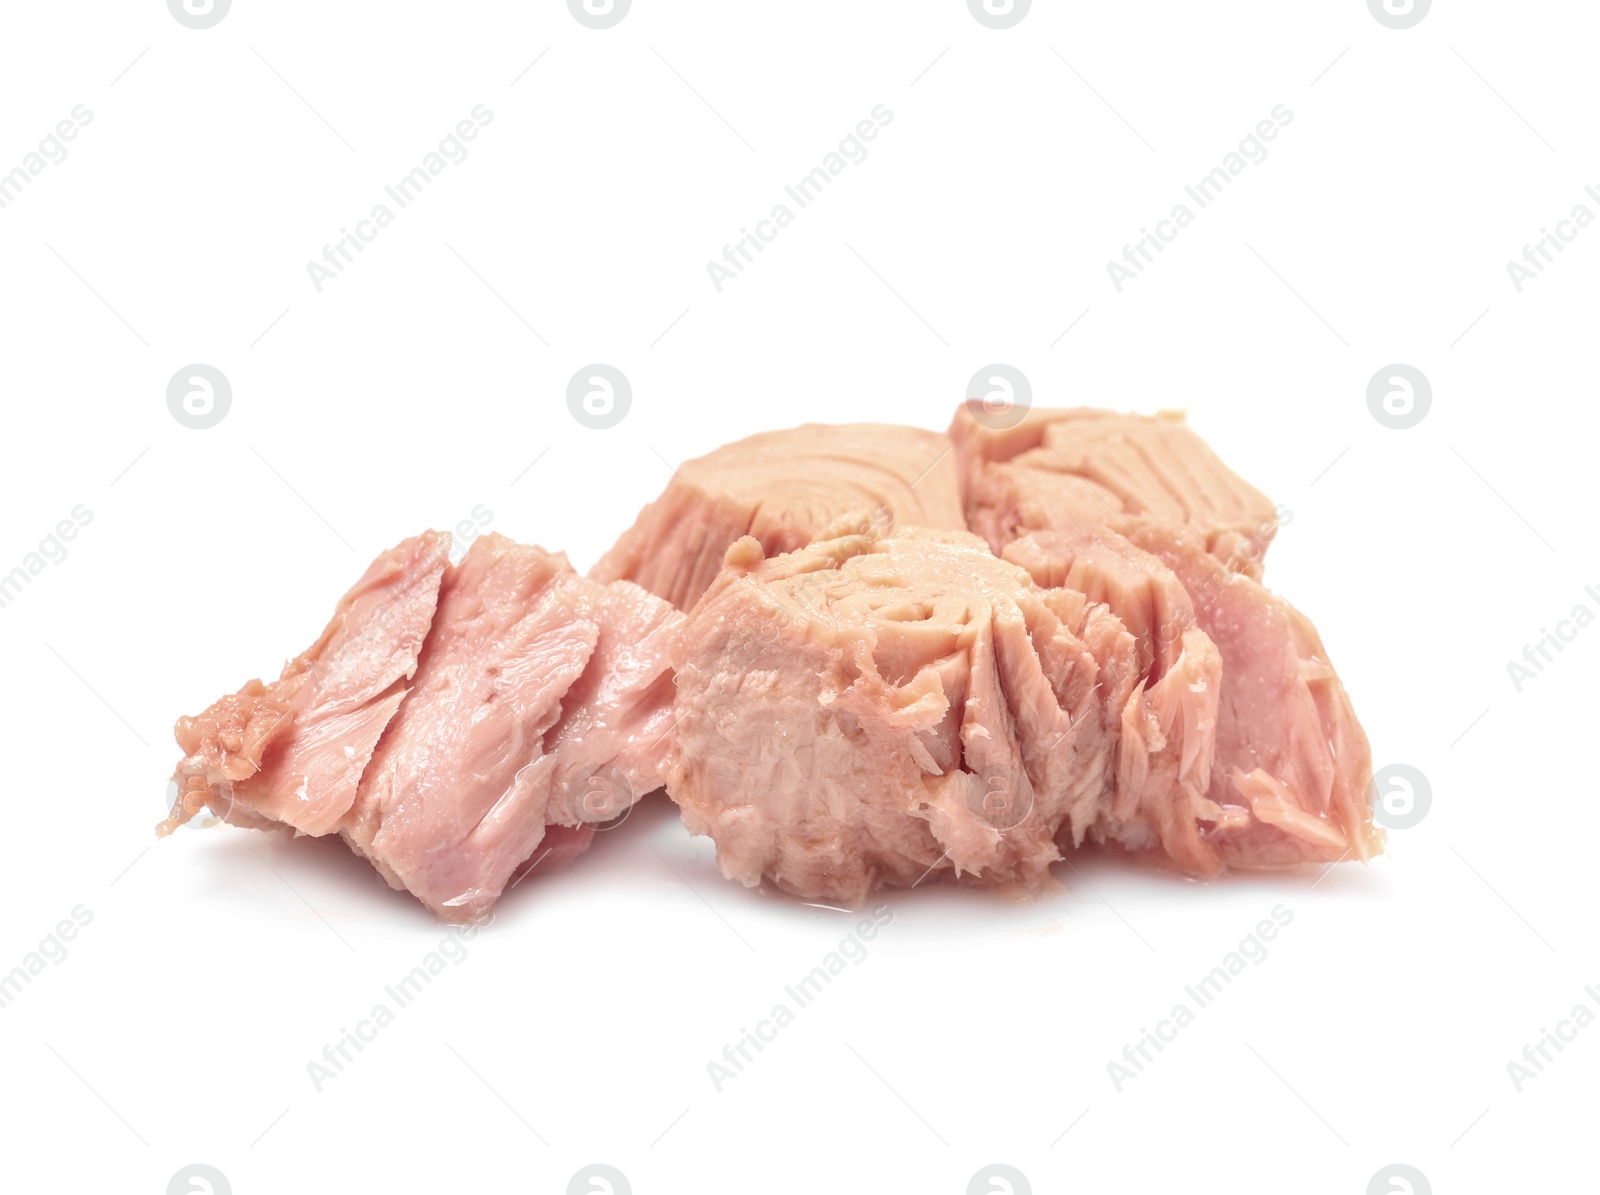 Photo of Pieces of canned tuna on white background